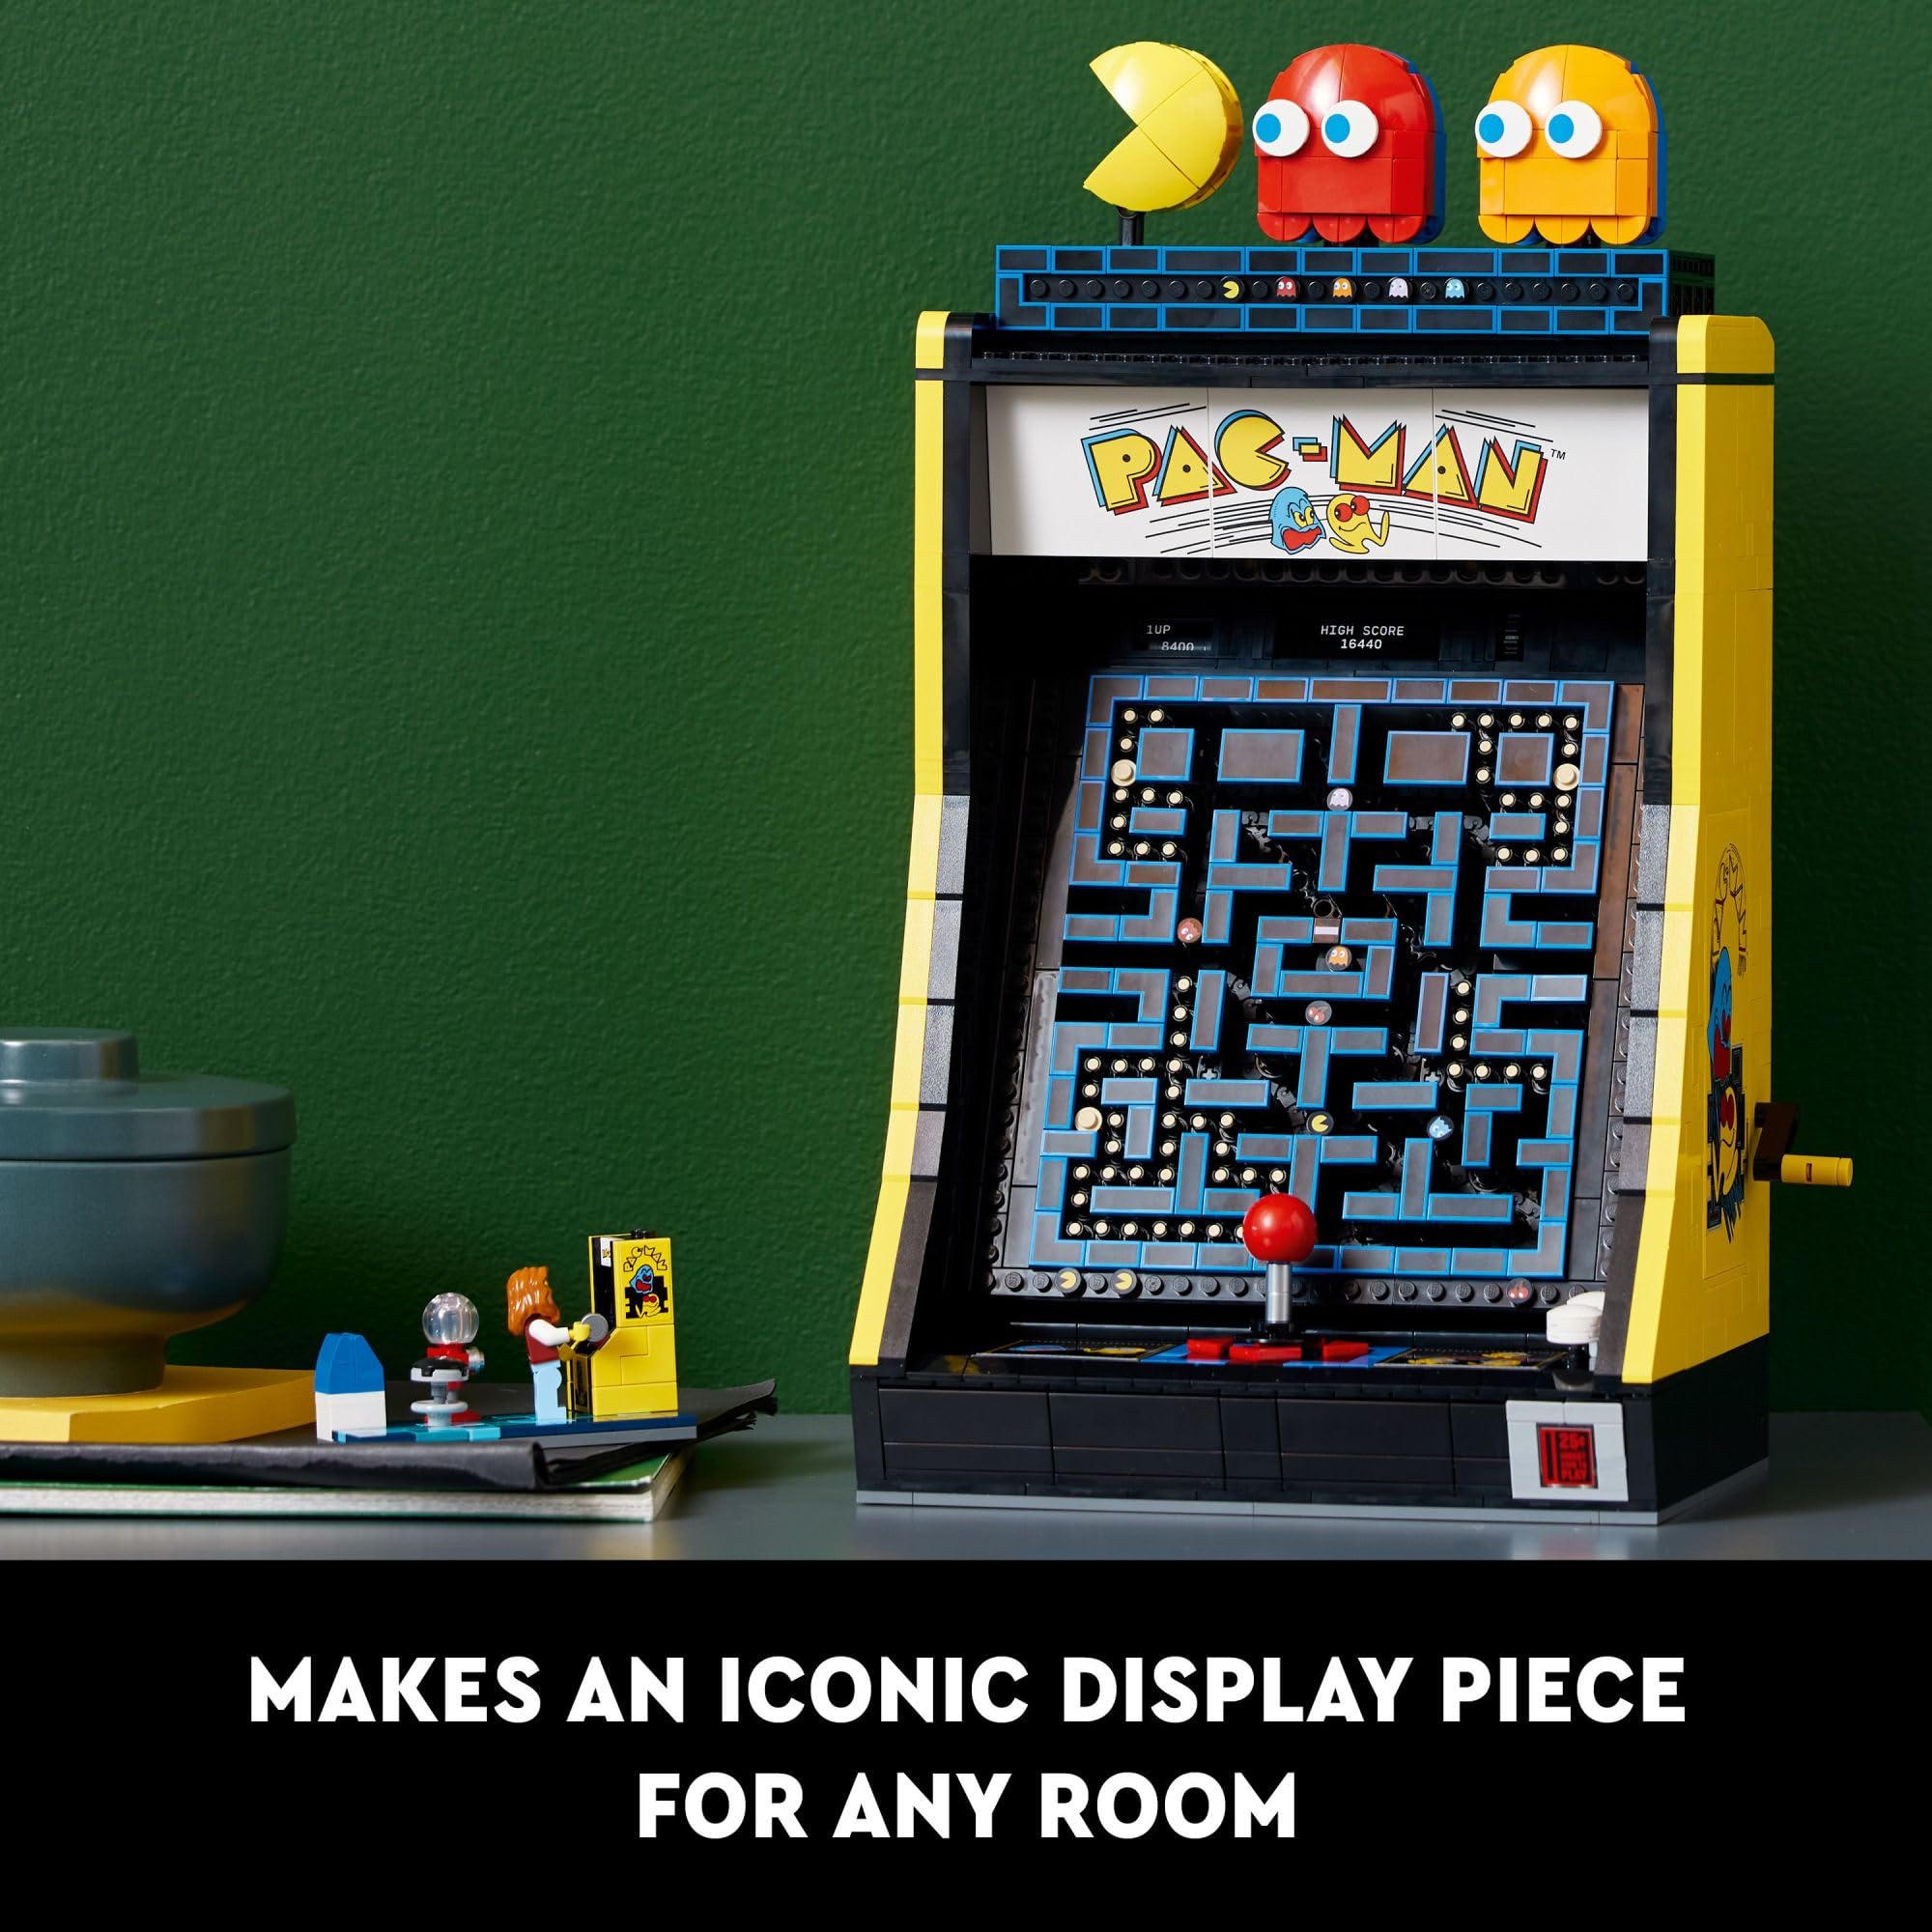 LEGO Icons PAC-Man Arcade Building Kit, Build a Replica Model of a Classic Video Game, Nostalgic Gift Idea for Fans of Retro Video Games and Retro Décor, Includes PAC-Man, Blinky and Clyde, 10323